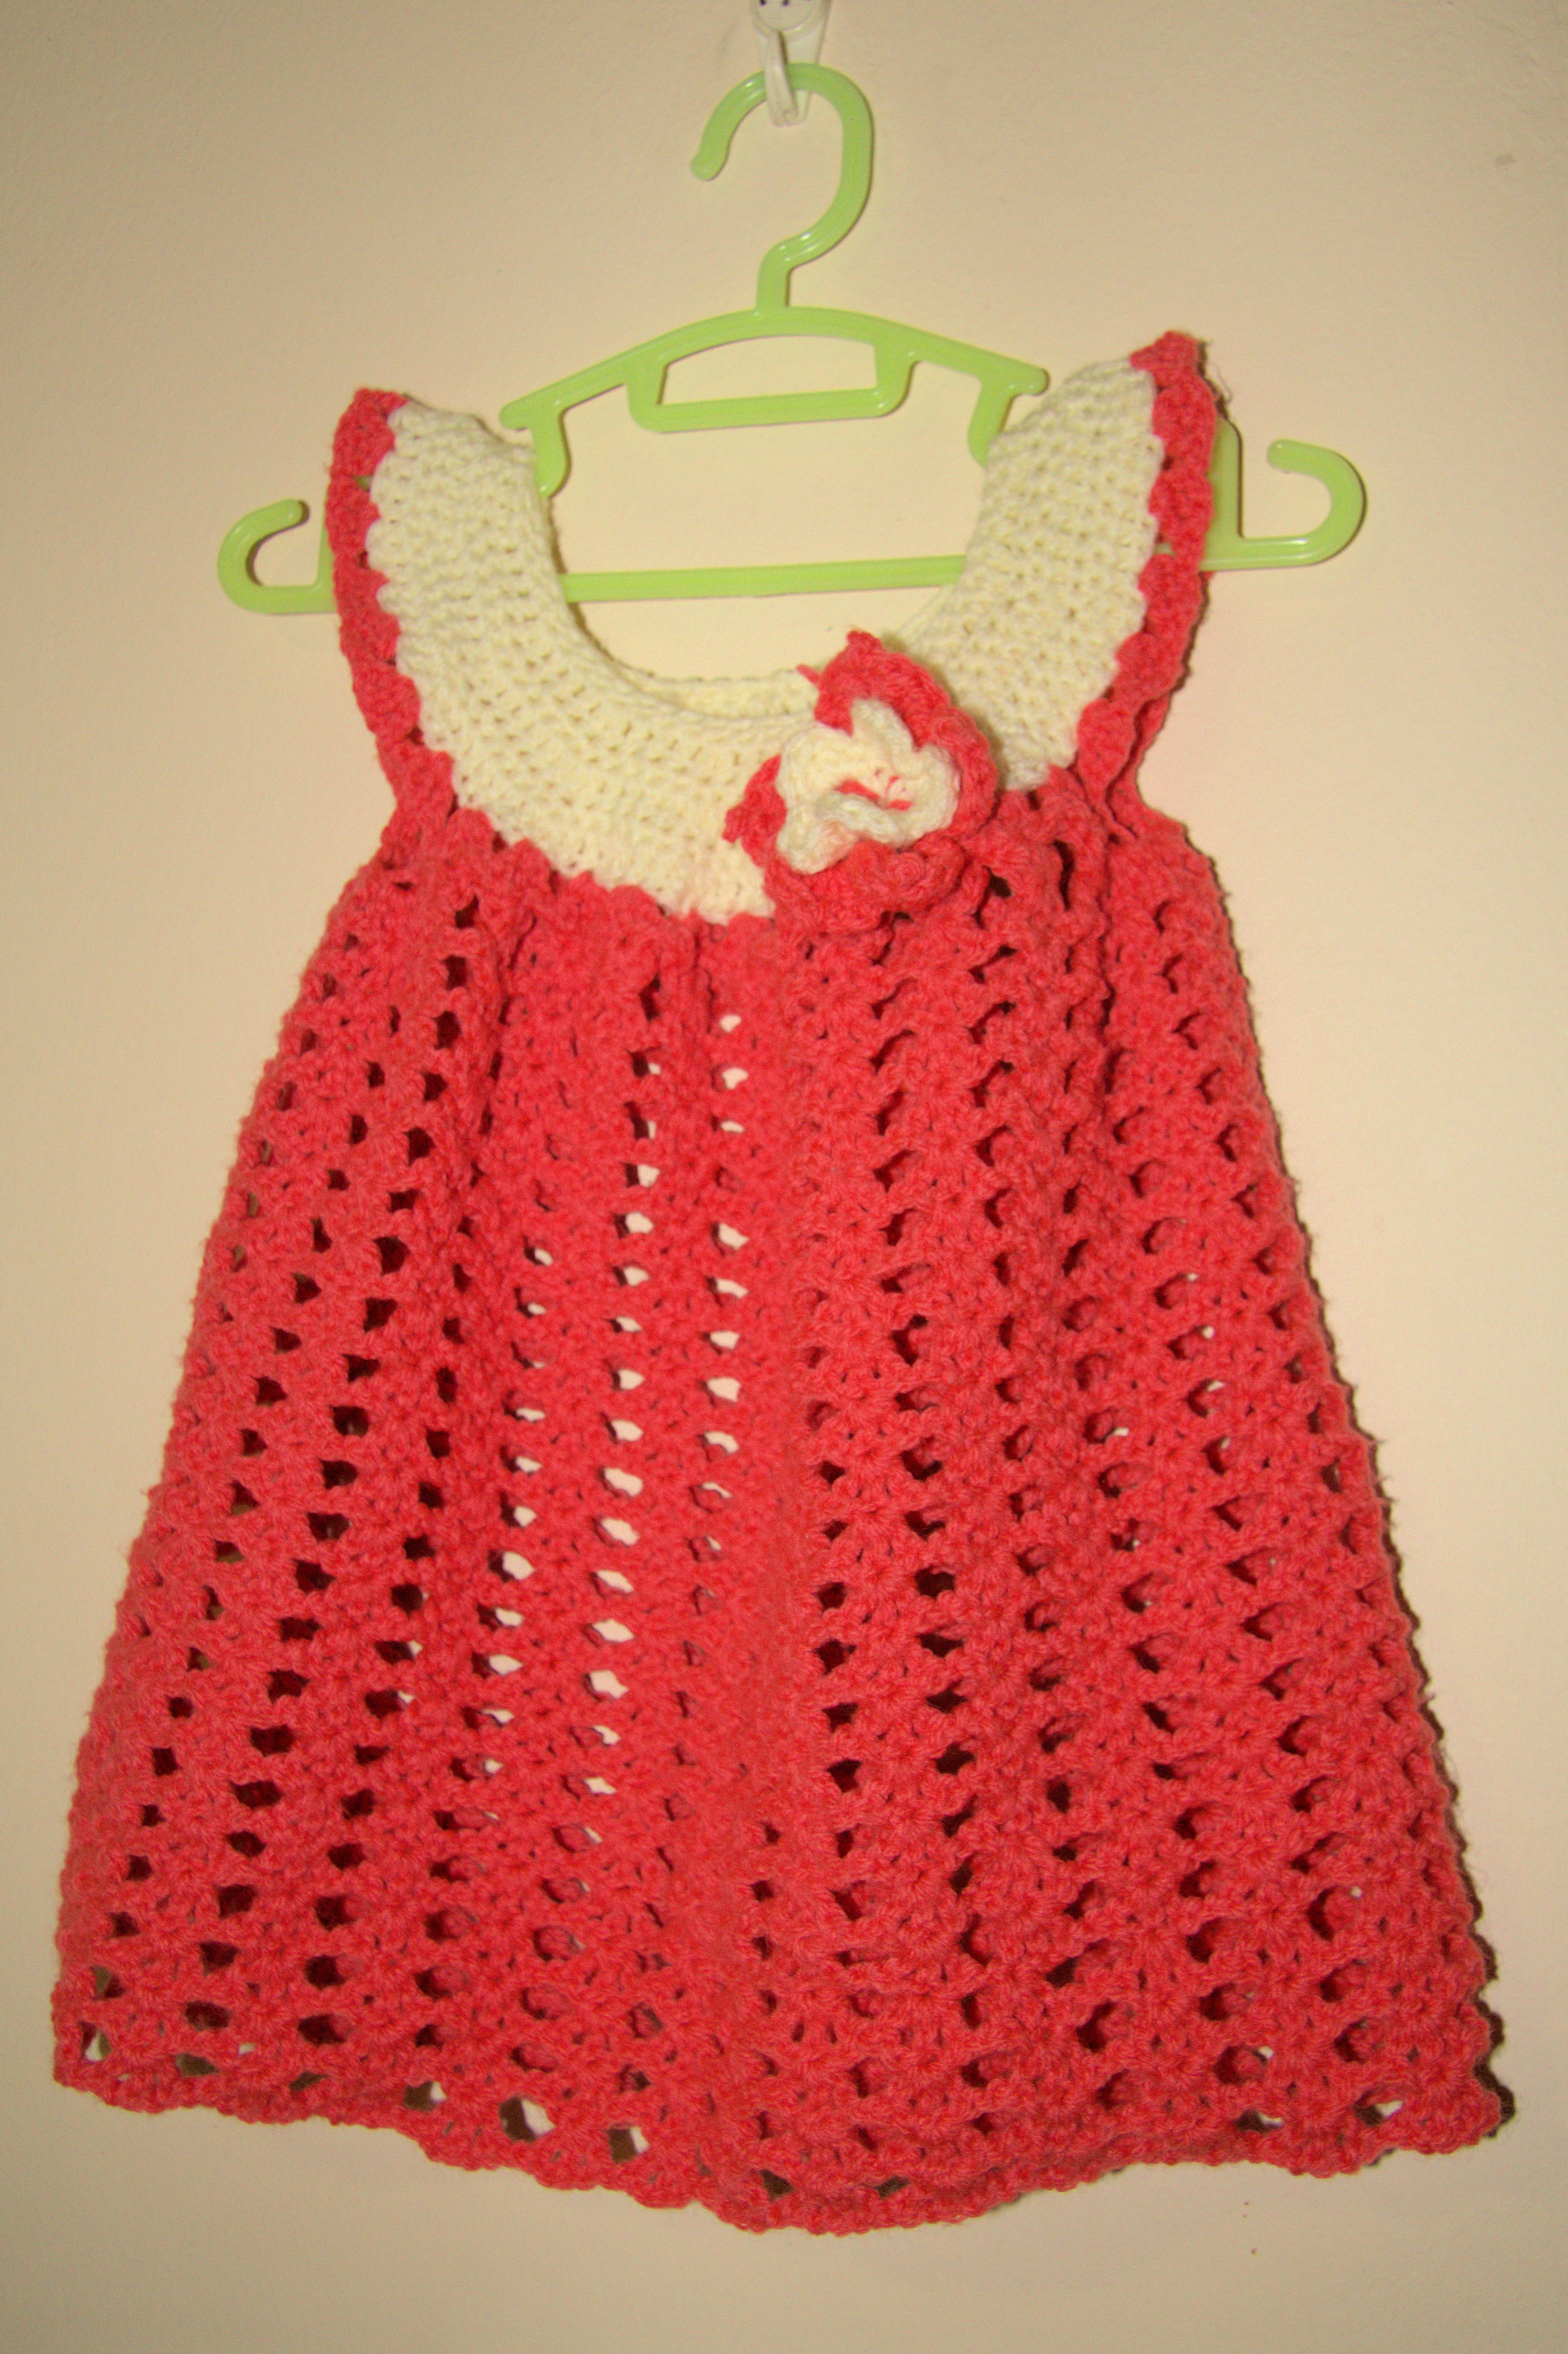 Crochet Baby Pinafore Dress Pattern My First Post And A Pinafore Crochet Dress For M Colourful Mommy